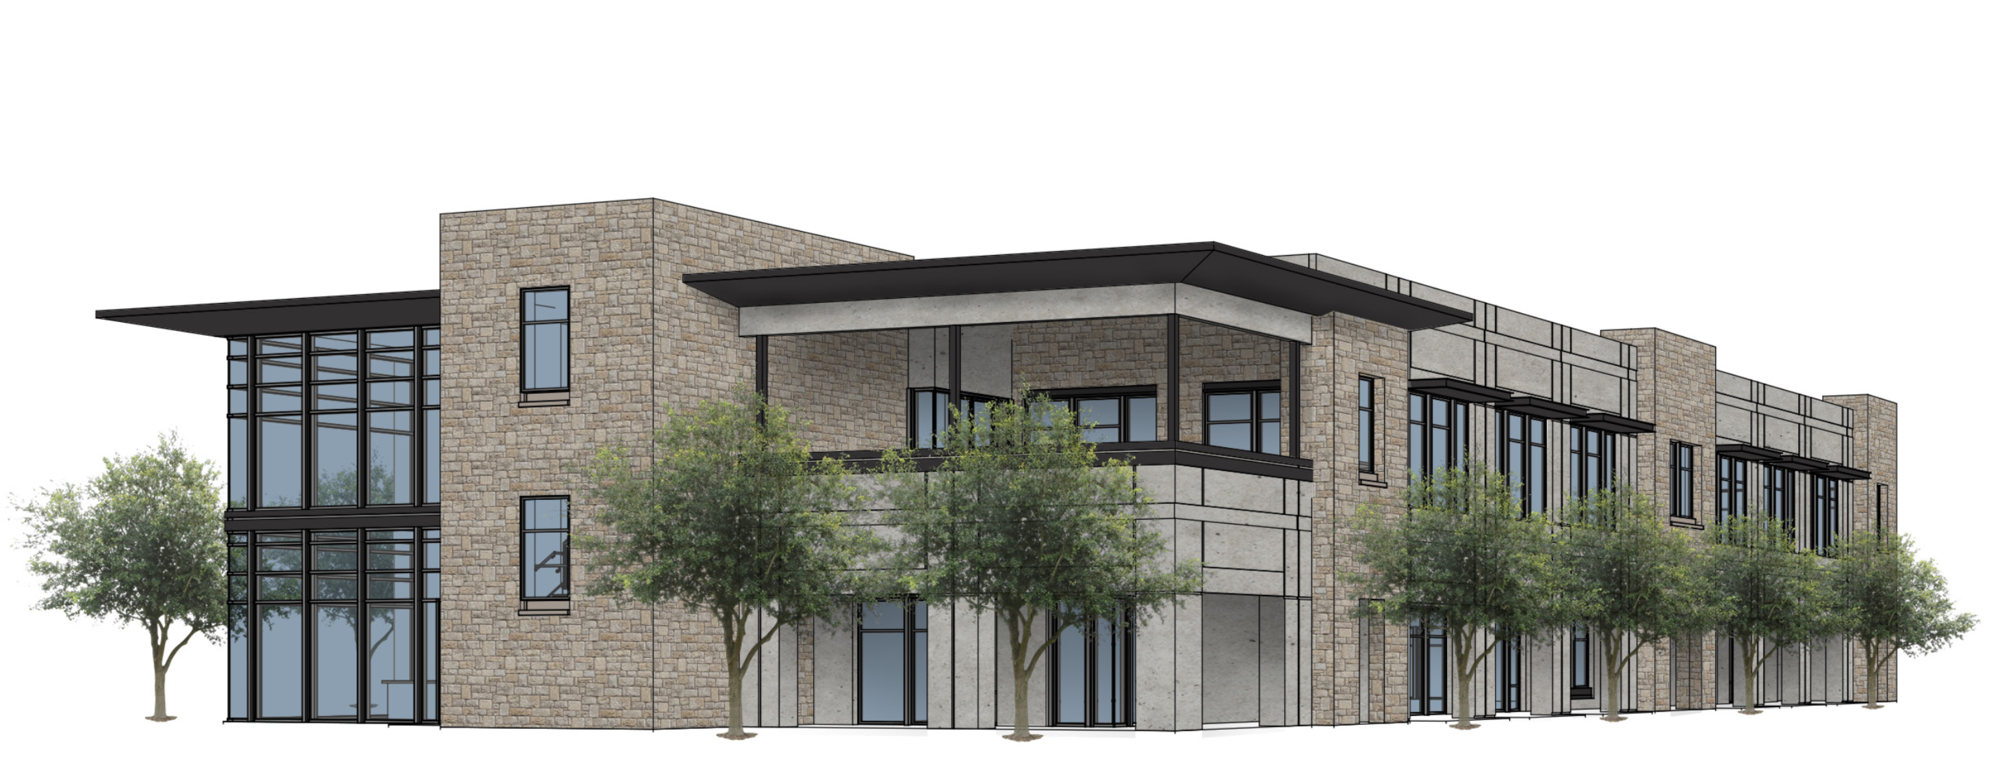 This building will house the foundation, Healthy West Orange and the Healthy User Bulletin Board. It also will lease space to other businesses and community organizations, the rental income of which will support the foundation.